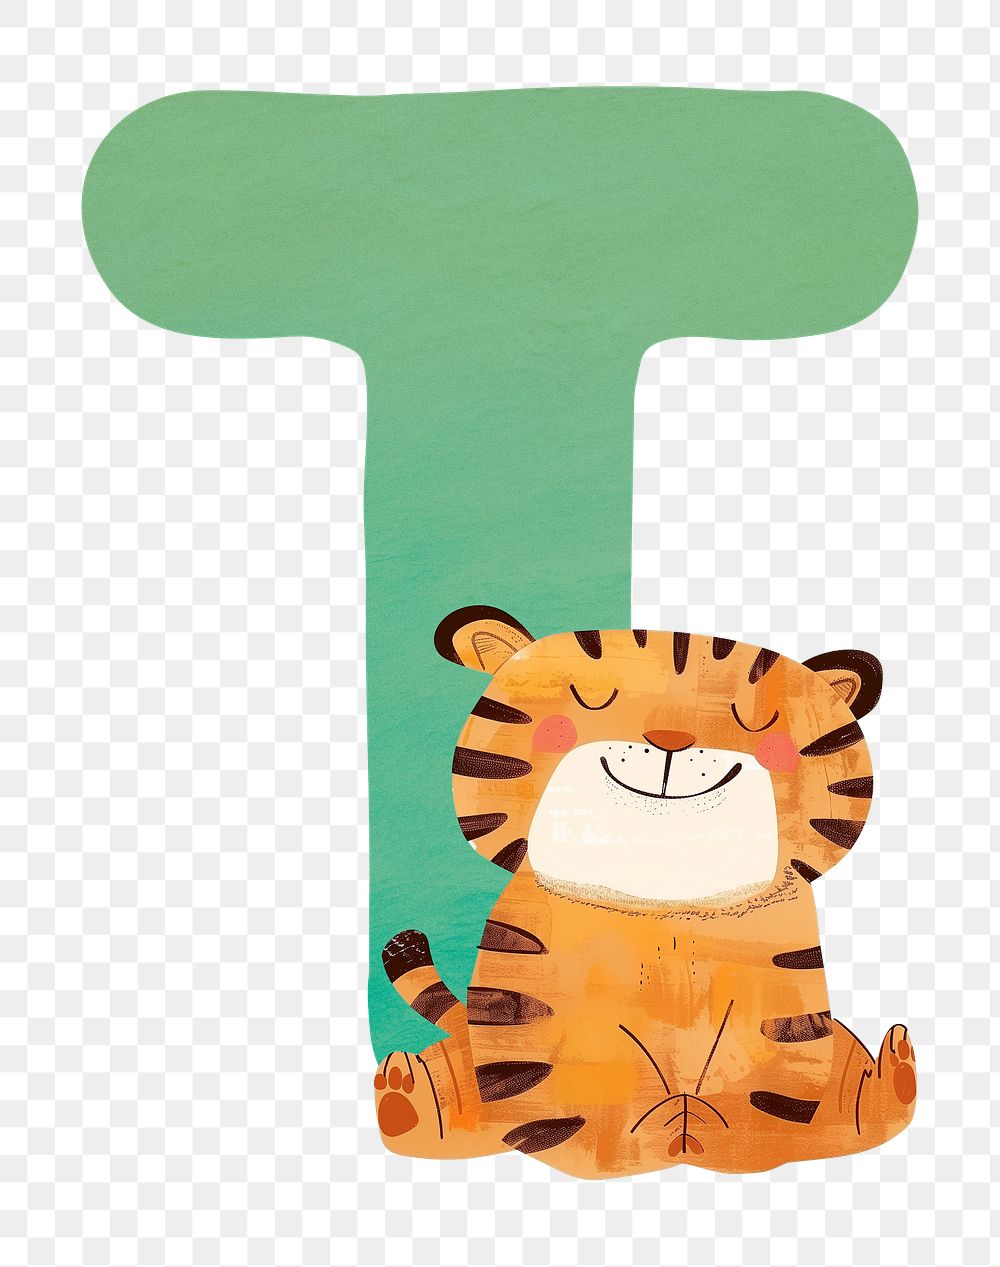 PNG green letter T with animal character, transparent background